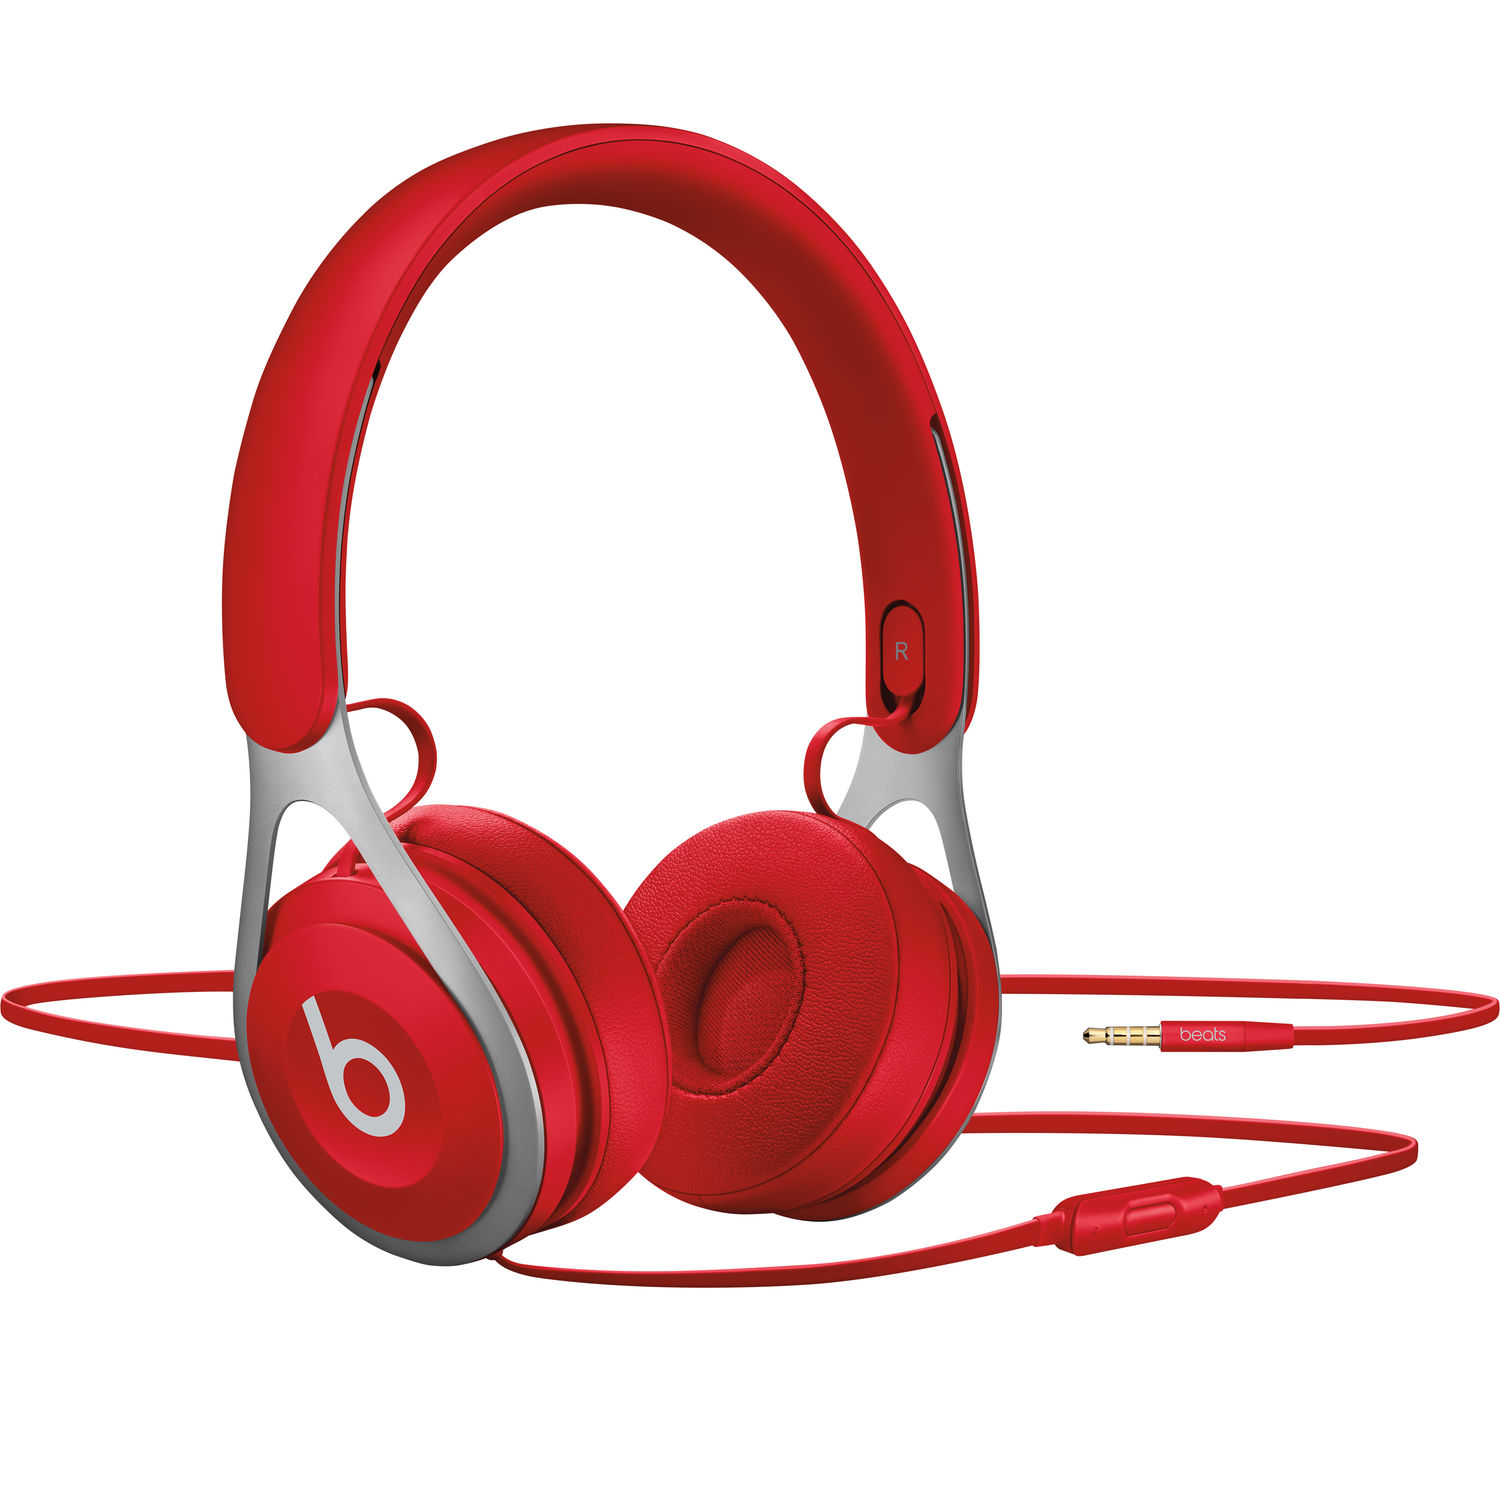 Beats EP Wired On-Ear Headphones (ML9C2ZM/A) - Battery Free for Unlimited Listening, Built in Mic and Controls - (Red) - image 1 of 6